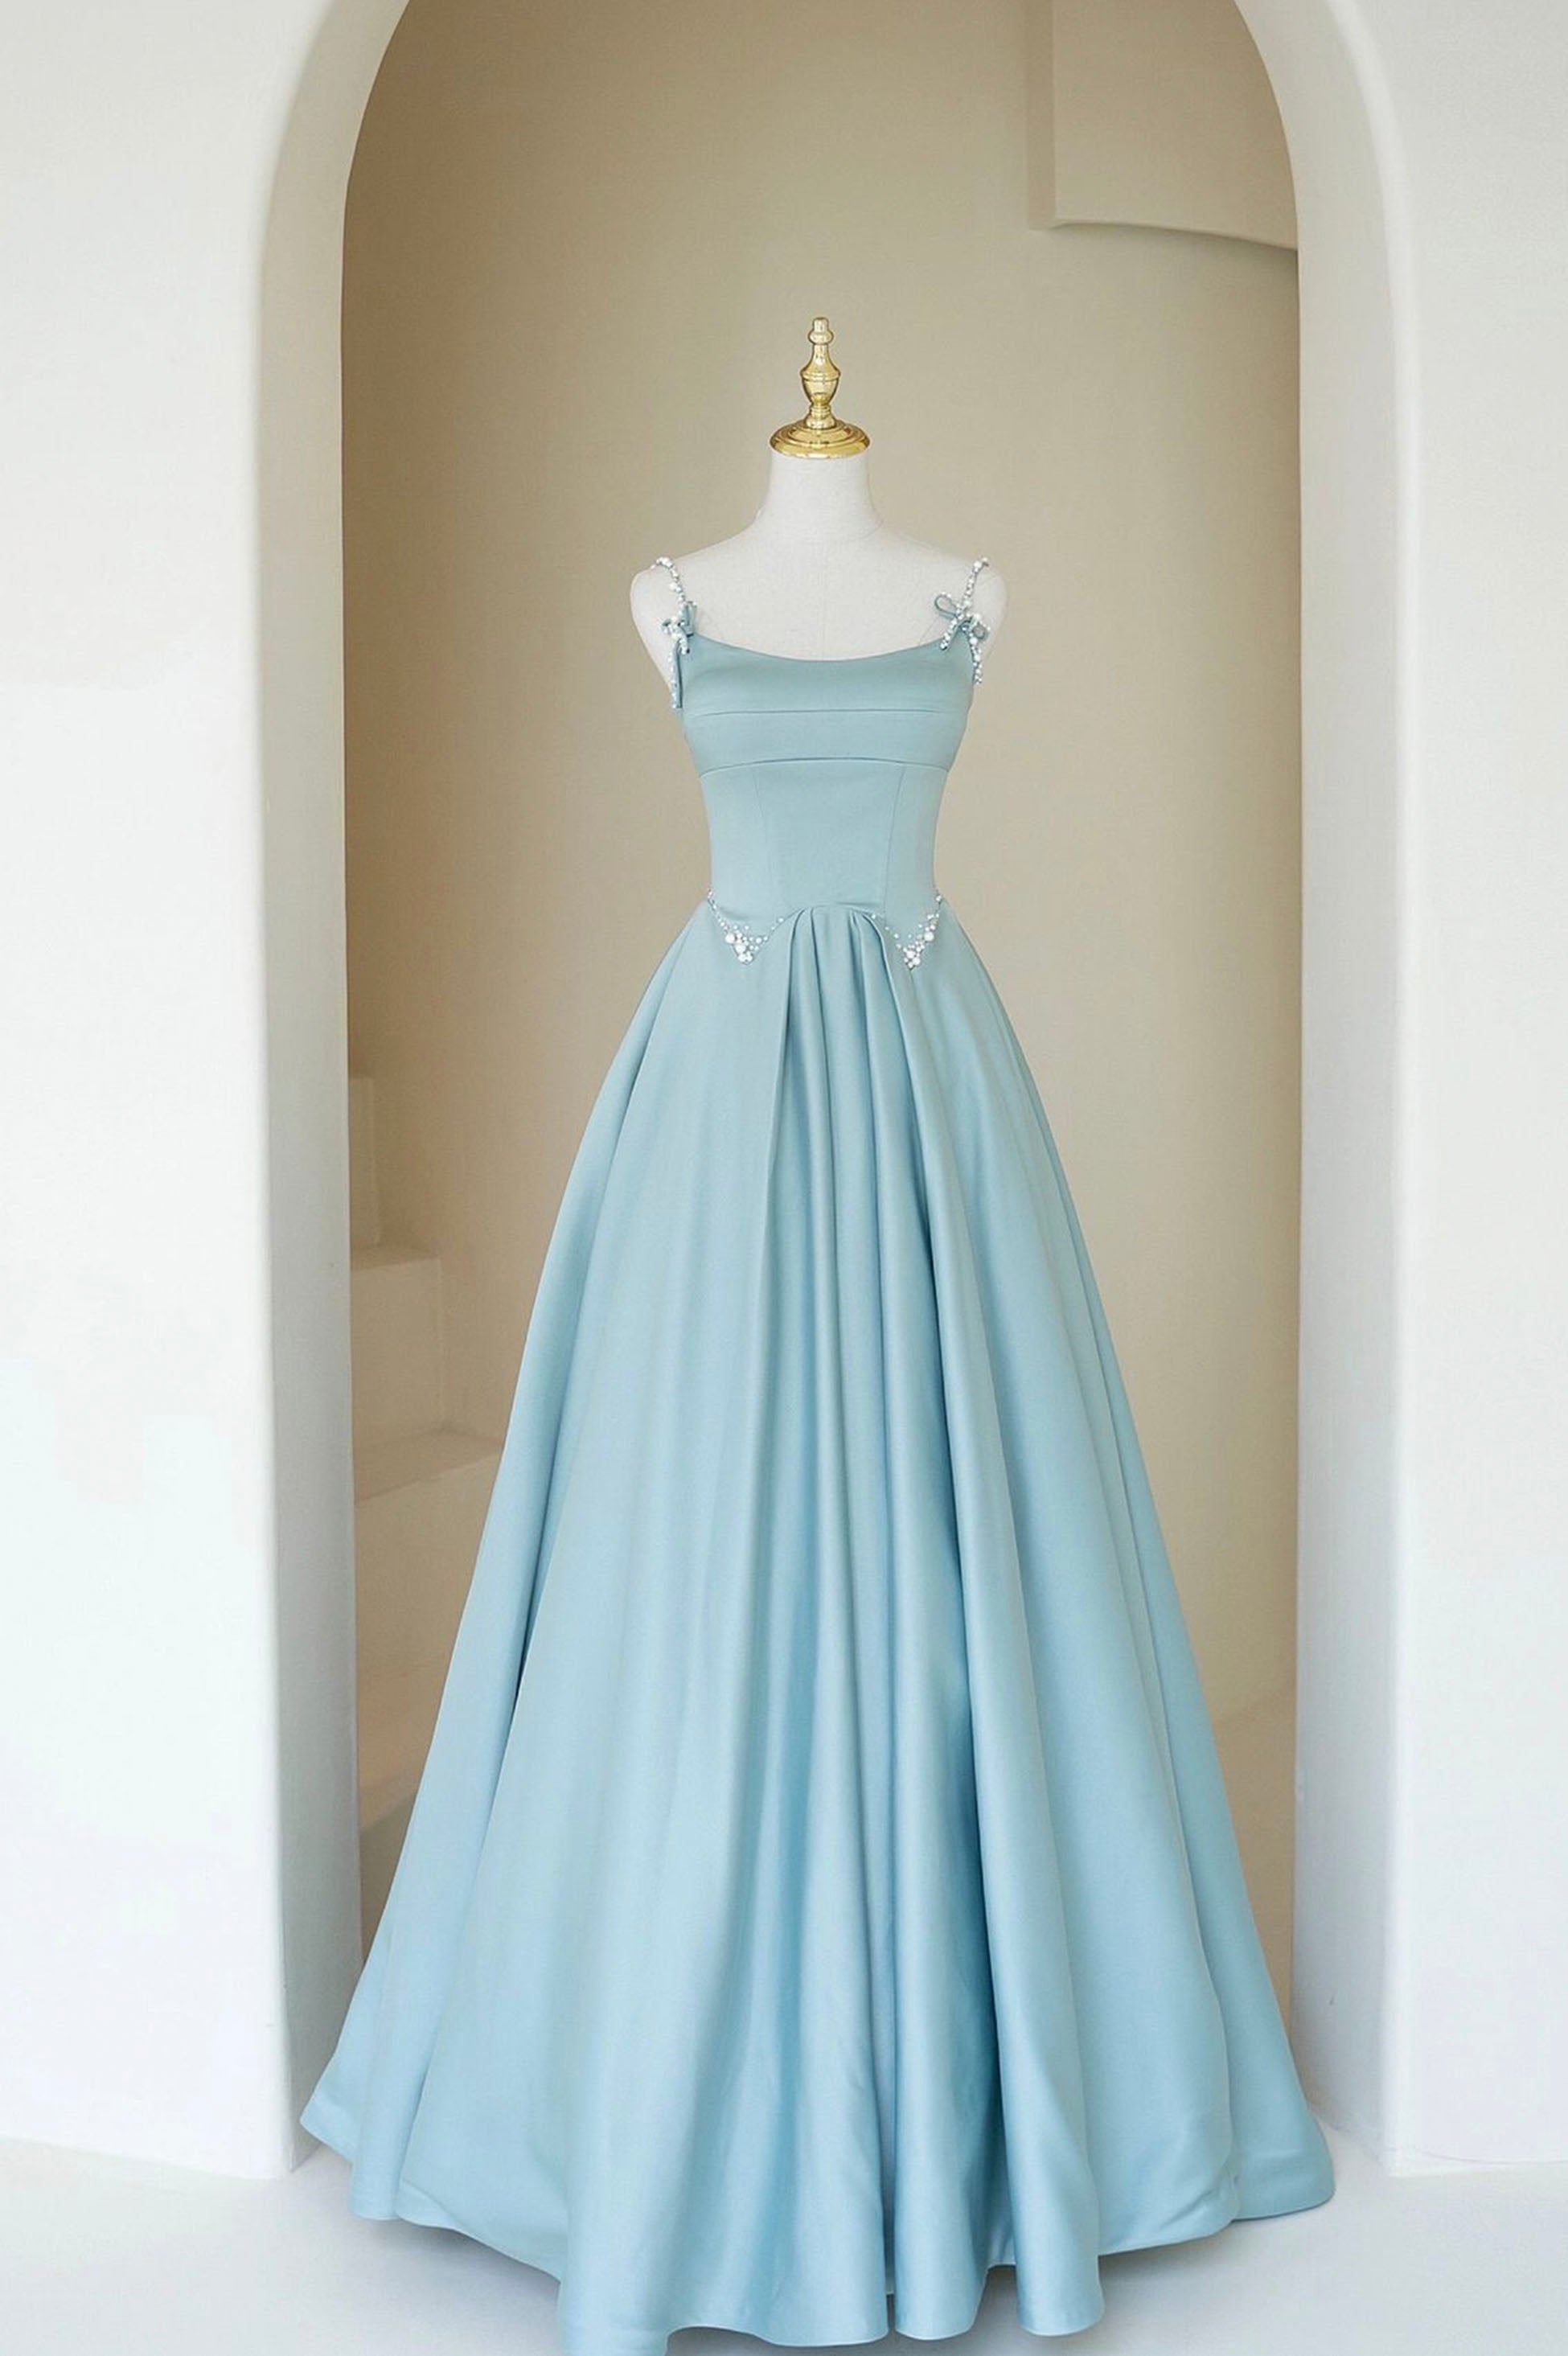 Blue Satin Long A-Line Prom Dress Outfits For Girls, Spaghetti Straps Evening Dress